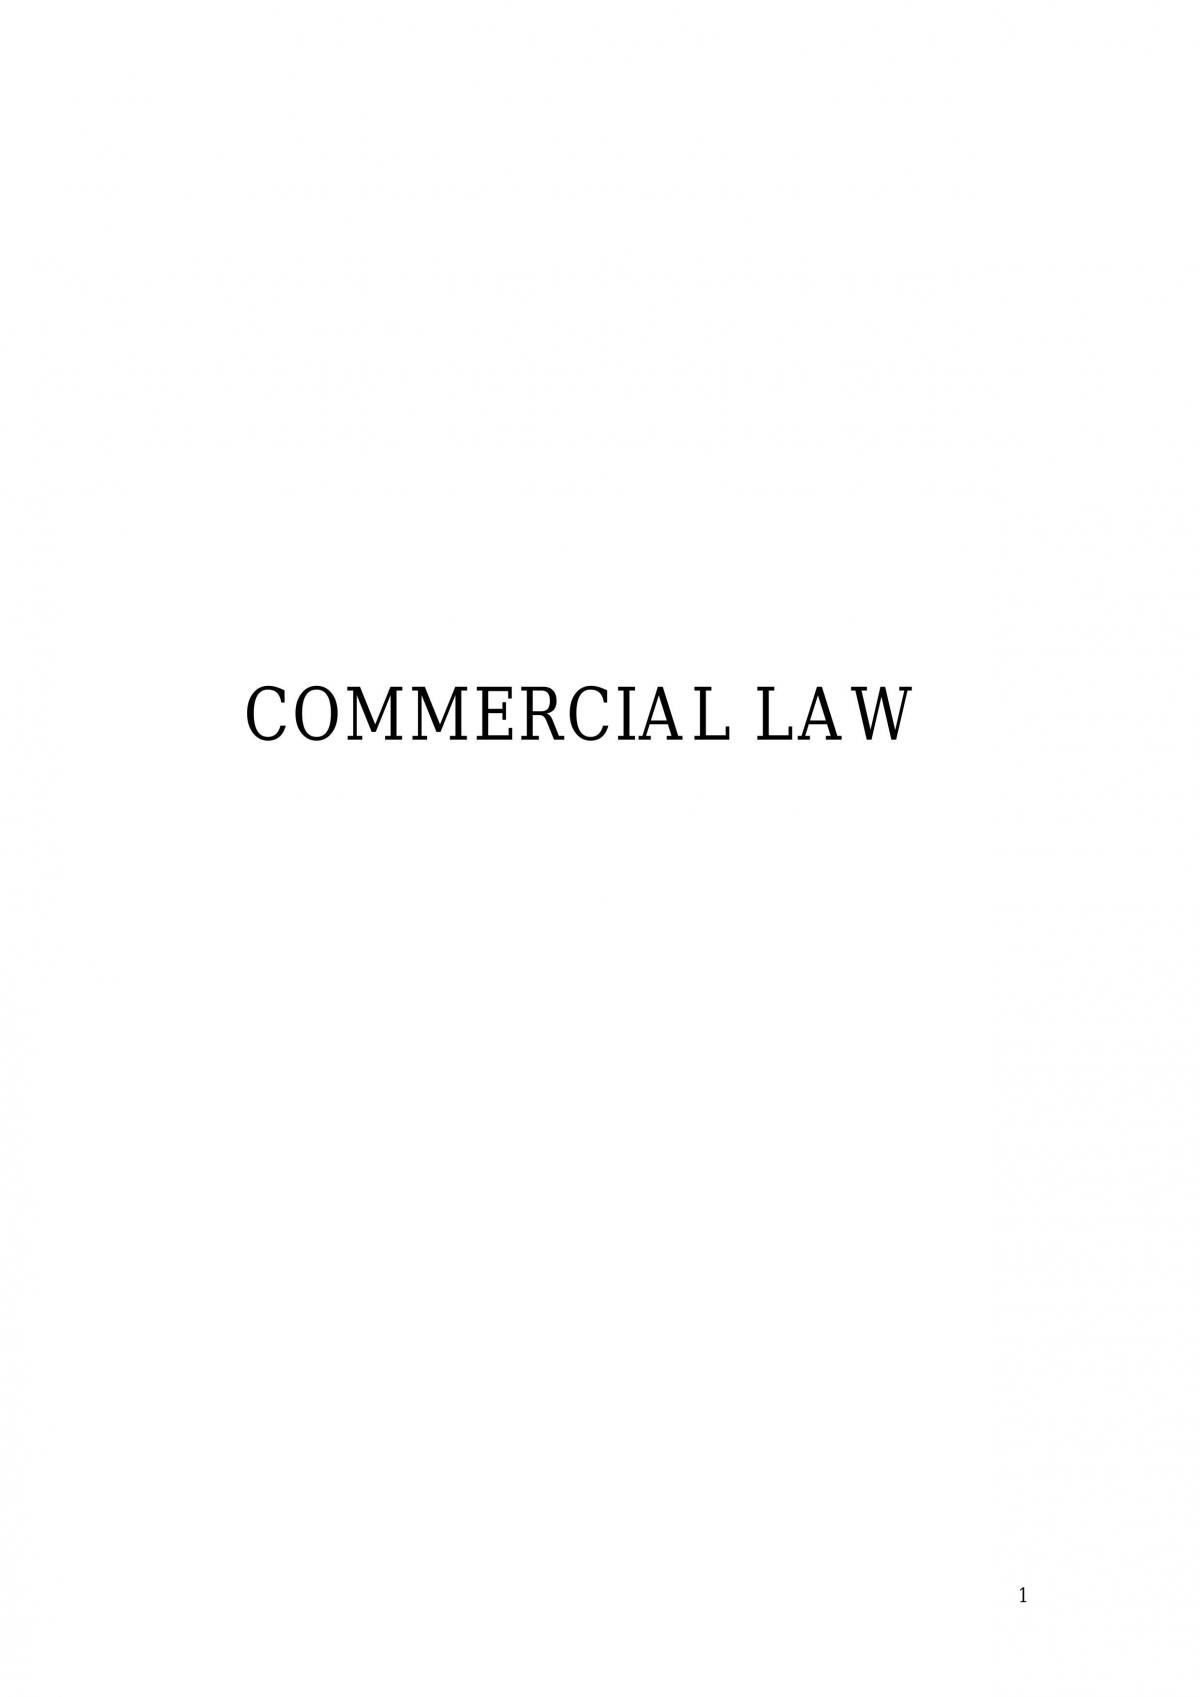 commercial law assignment topics